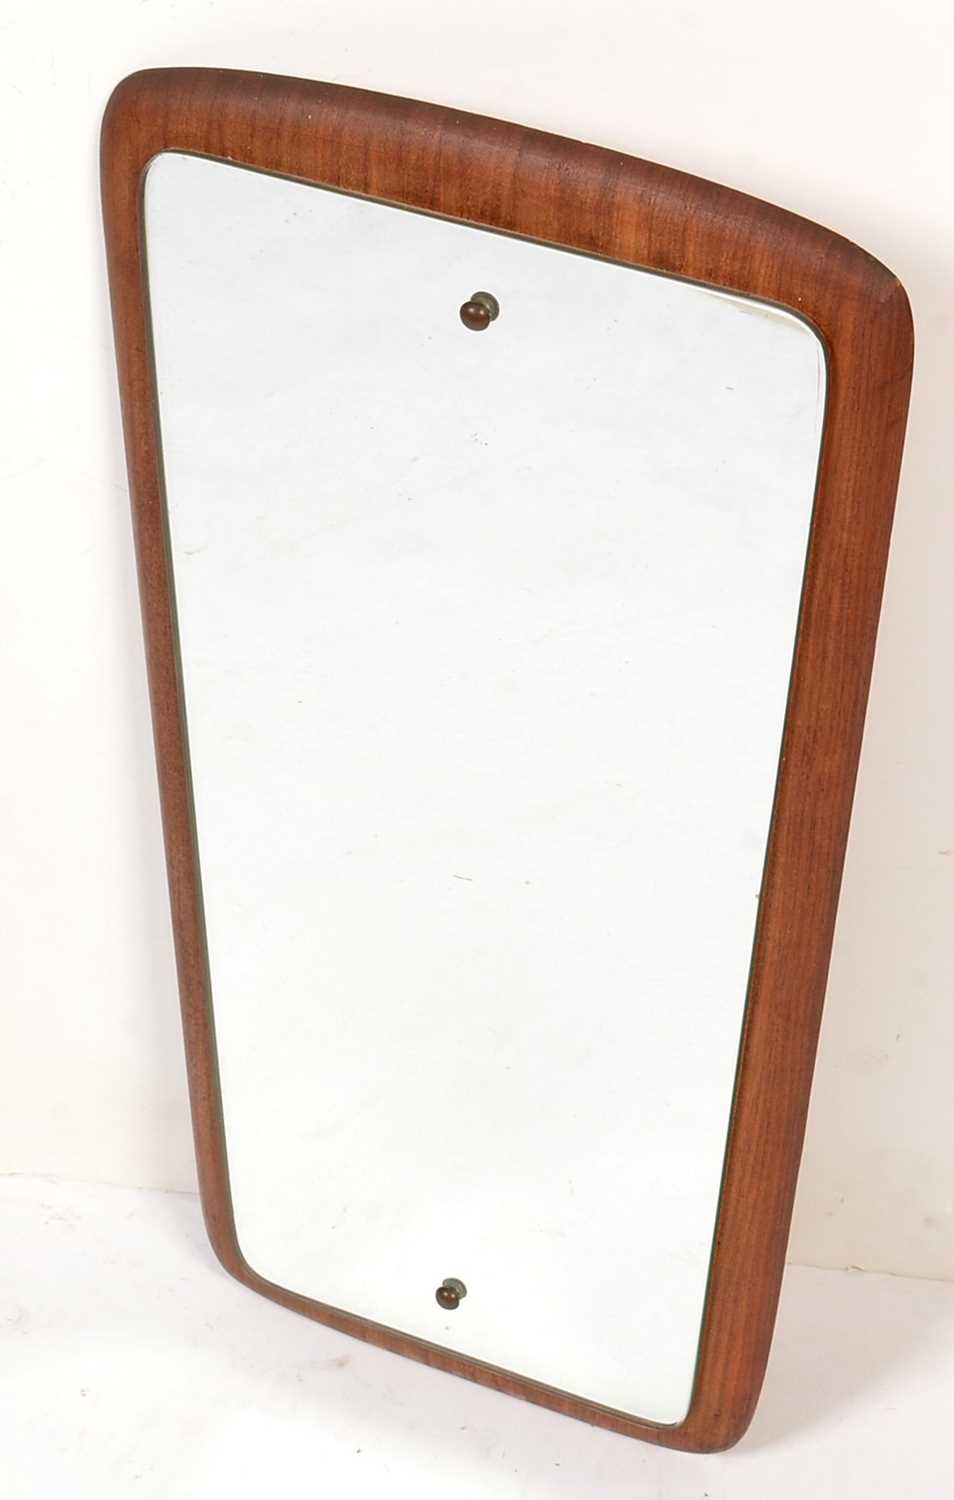 Lot 767 - Globe Brand Mirrors: a teak-backed mirror with tapered frame.